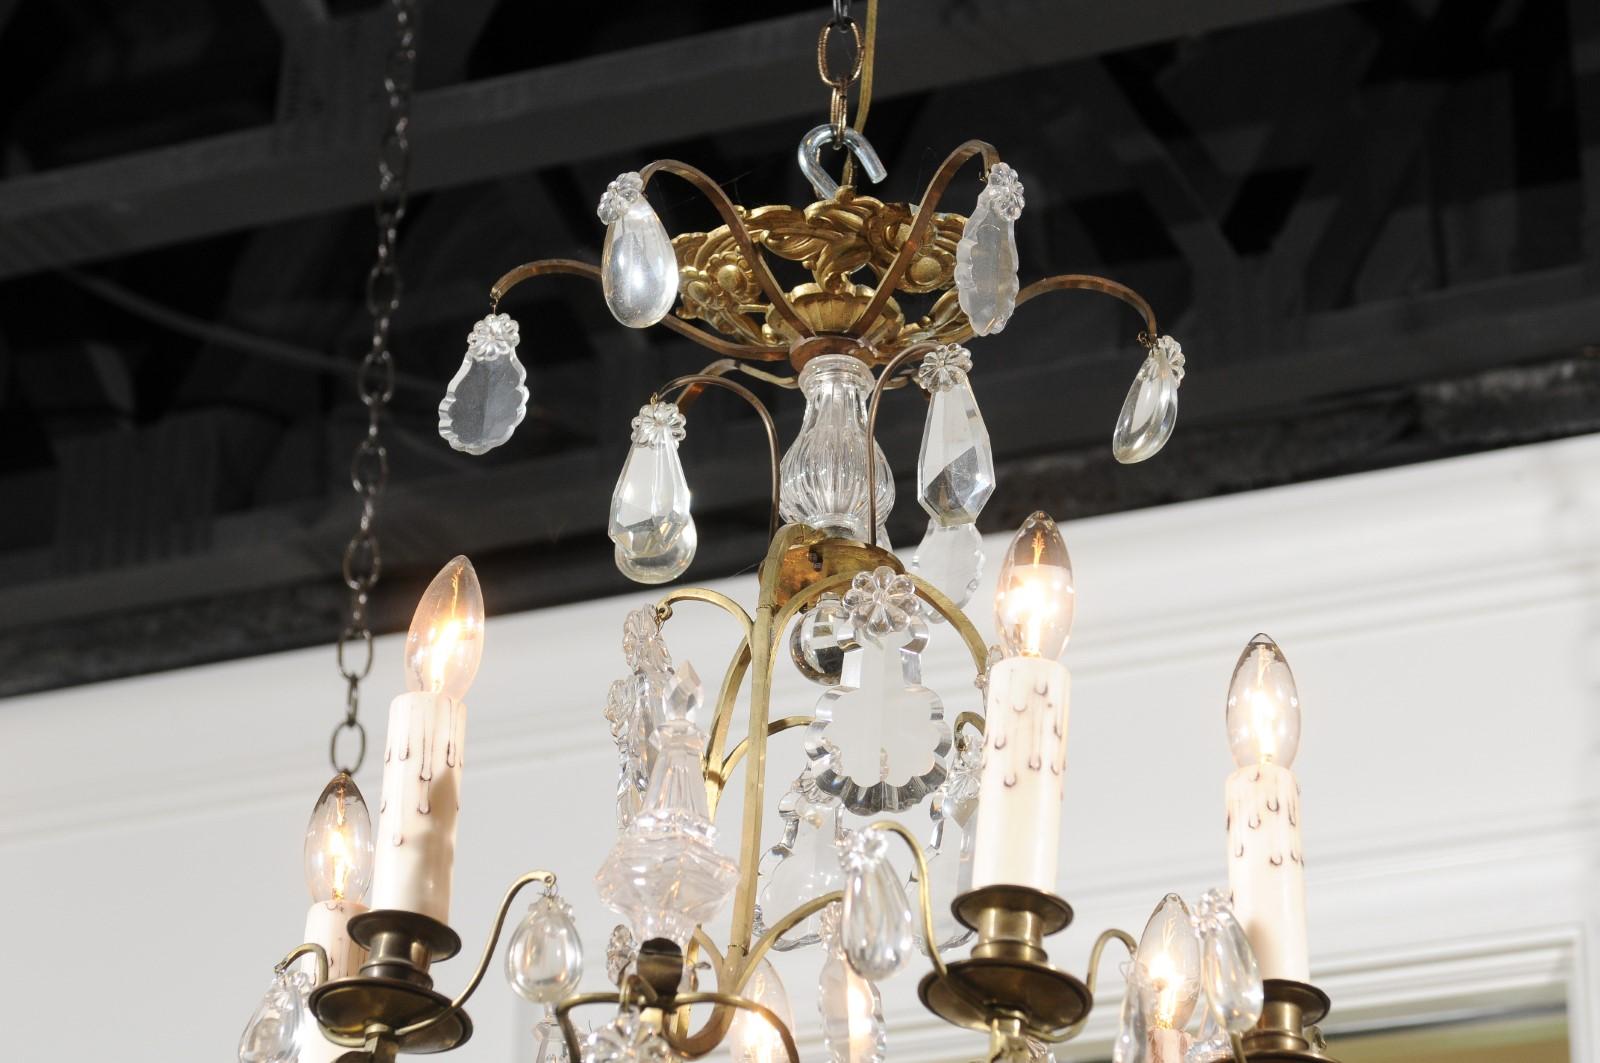 French 19th Century Six-Light Crystal Chandelier with Scrolled Brass Armature In Good Condition For Sale In Atlanta, GA